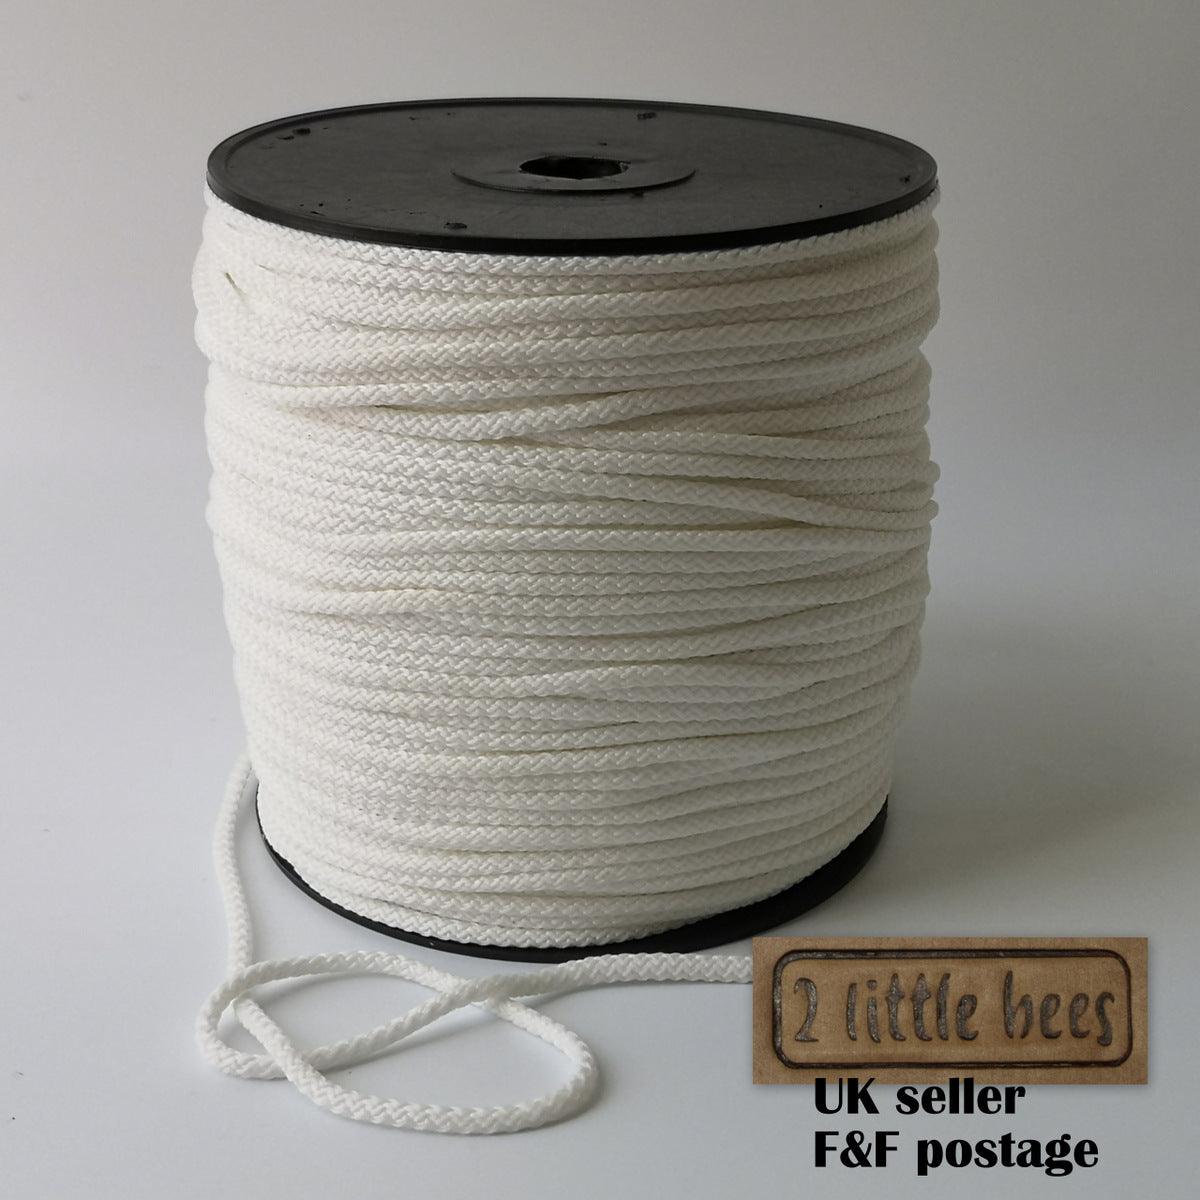 5mm White Strong Rope – 2 little bees